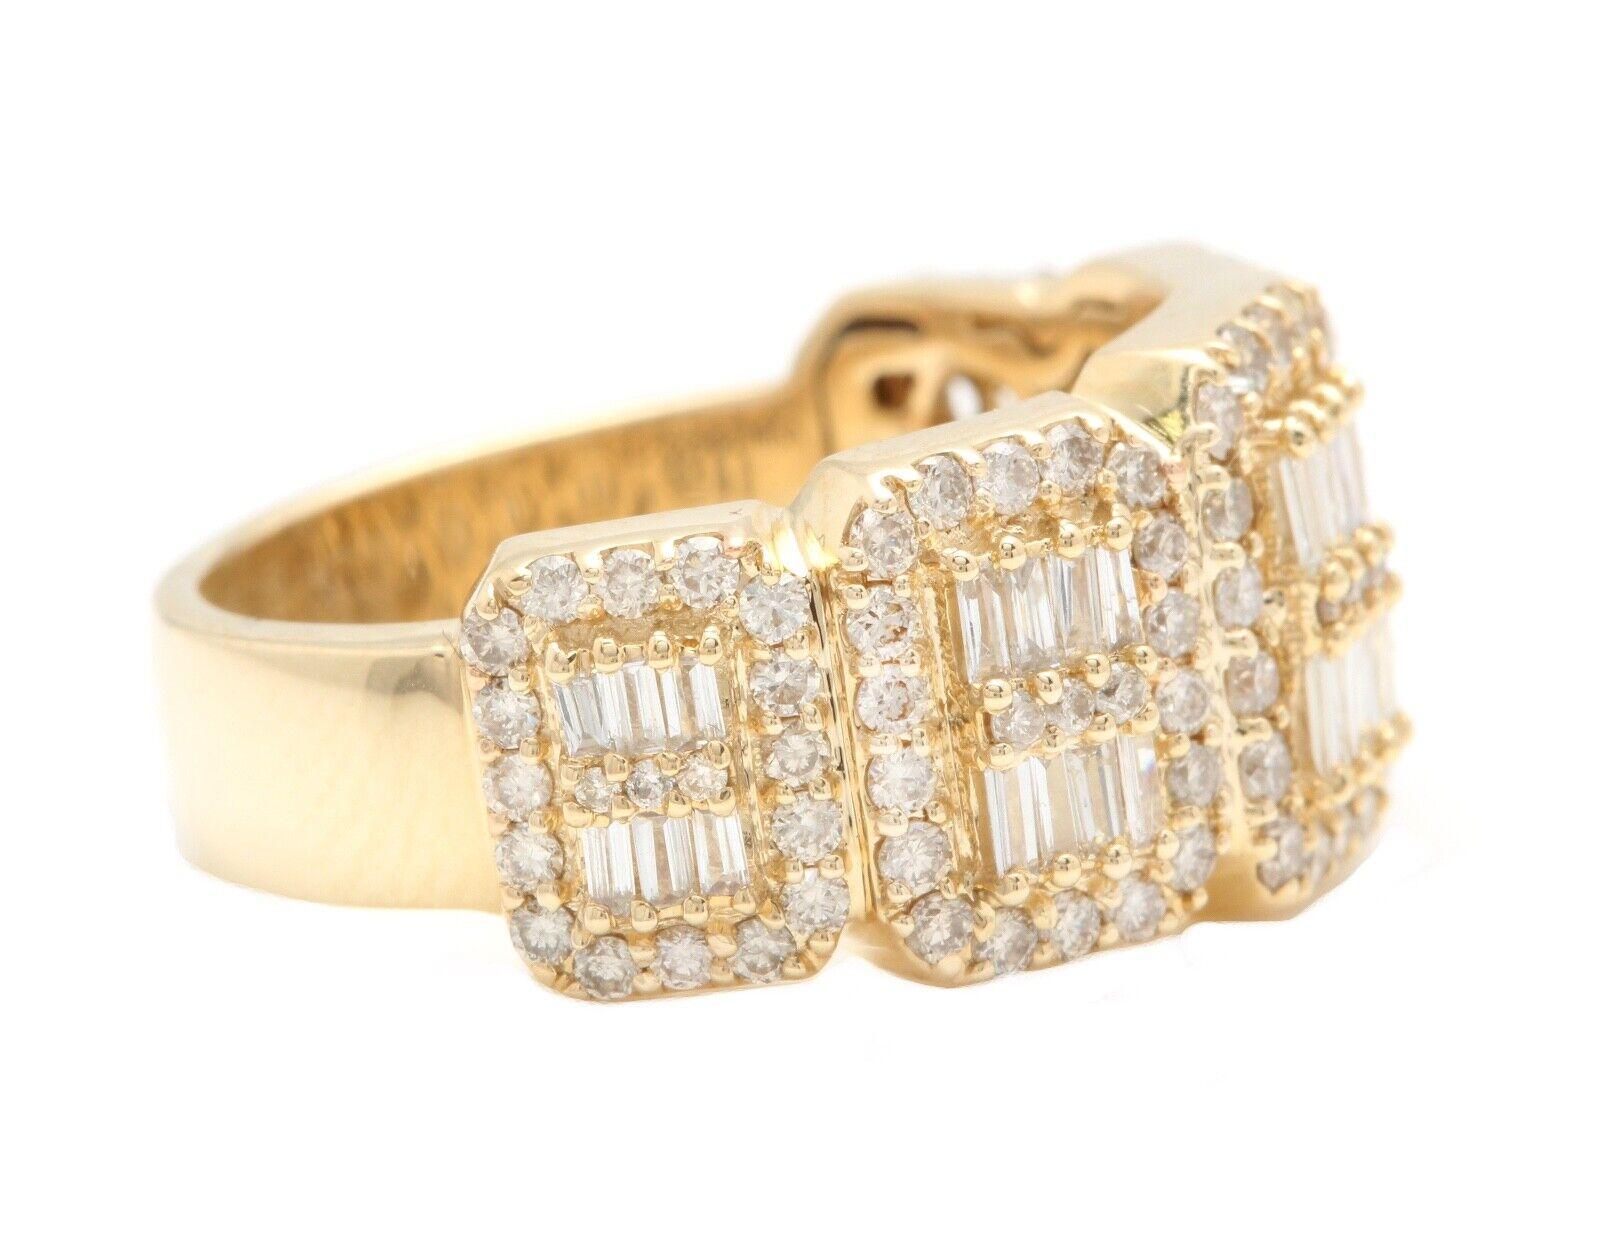 2.50Ct Natural Diamond 14K Solid Yellow Gold Men's Ring

Amazing looking piece!

Suggested Replacement Value Approx. 7,000.00

Total Natural Round Cut Diamonds Weight: Approx. 2.50 Carats (color H / Clarity SI)

Width of the ring: 10.88 mm

Ring